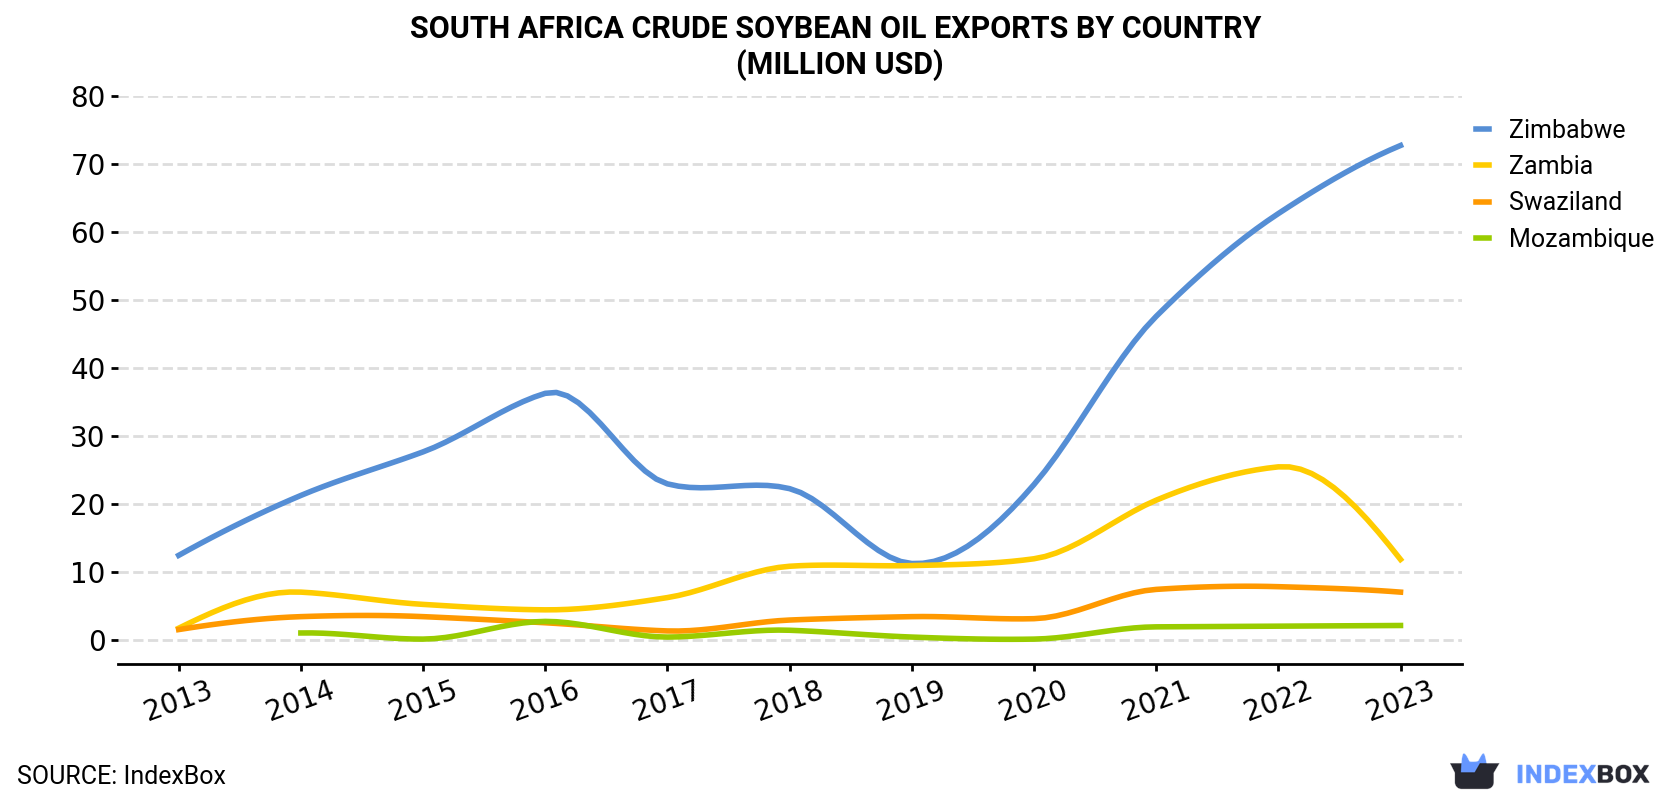 South Africa Crude Soybean Oil Exports By Country (Million USD)